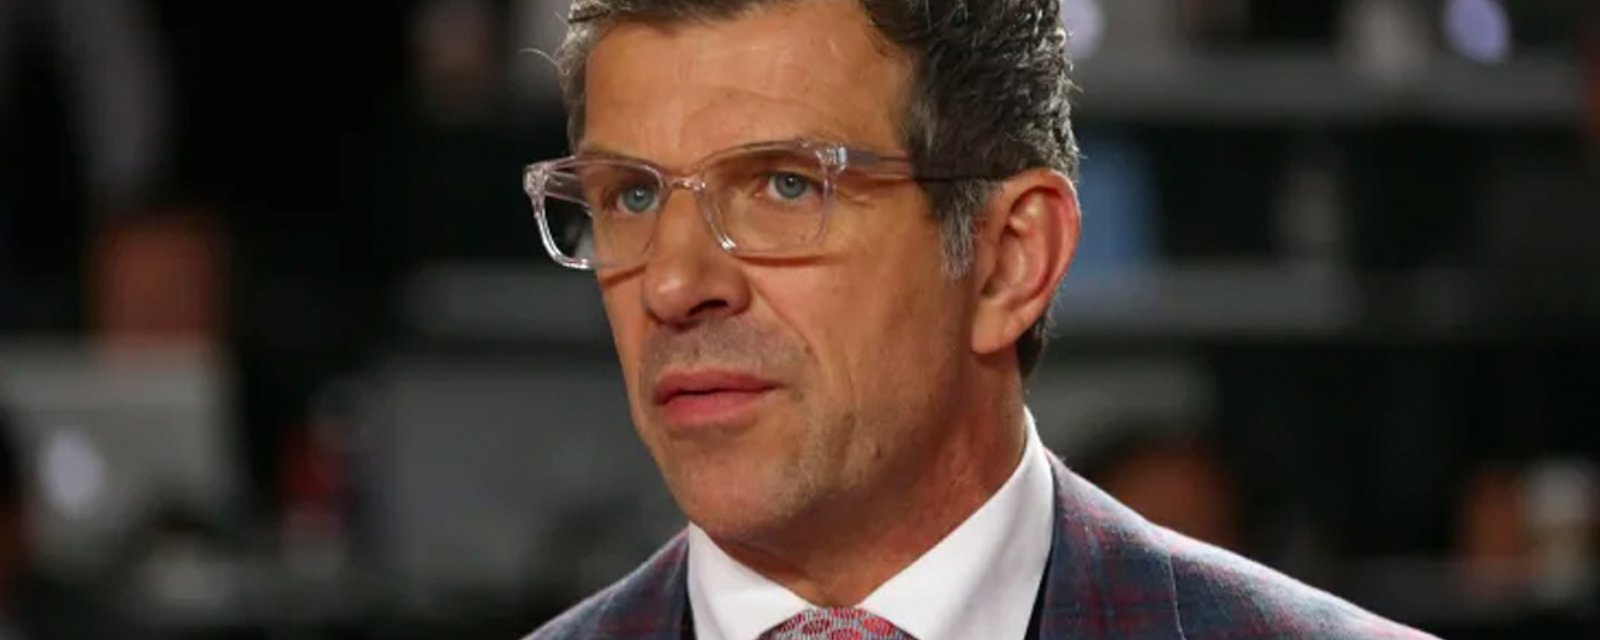 Bergevin gives Florida permission to interview Panthers franchise icon for GM position